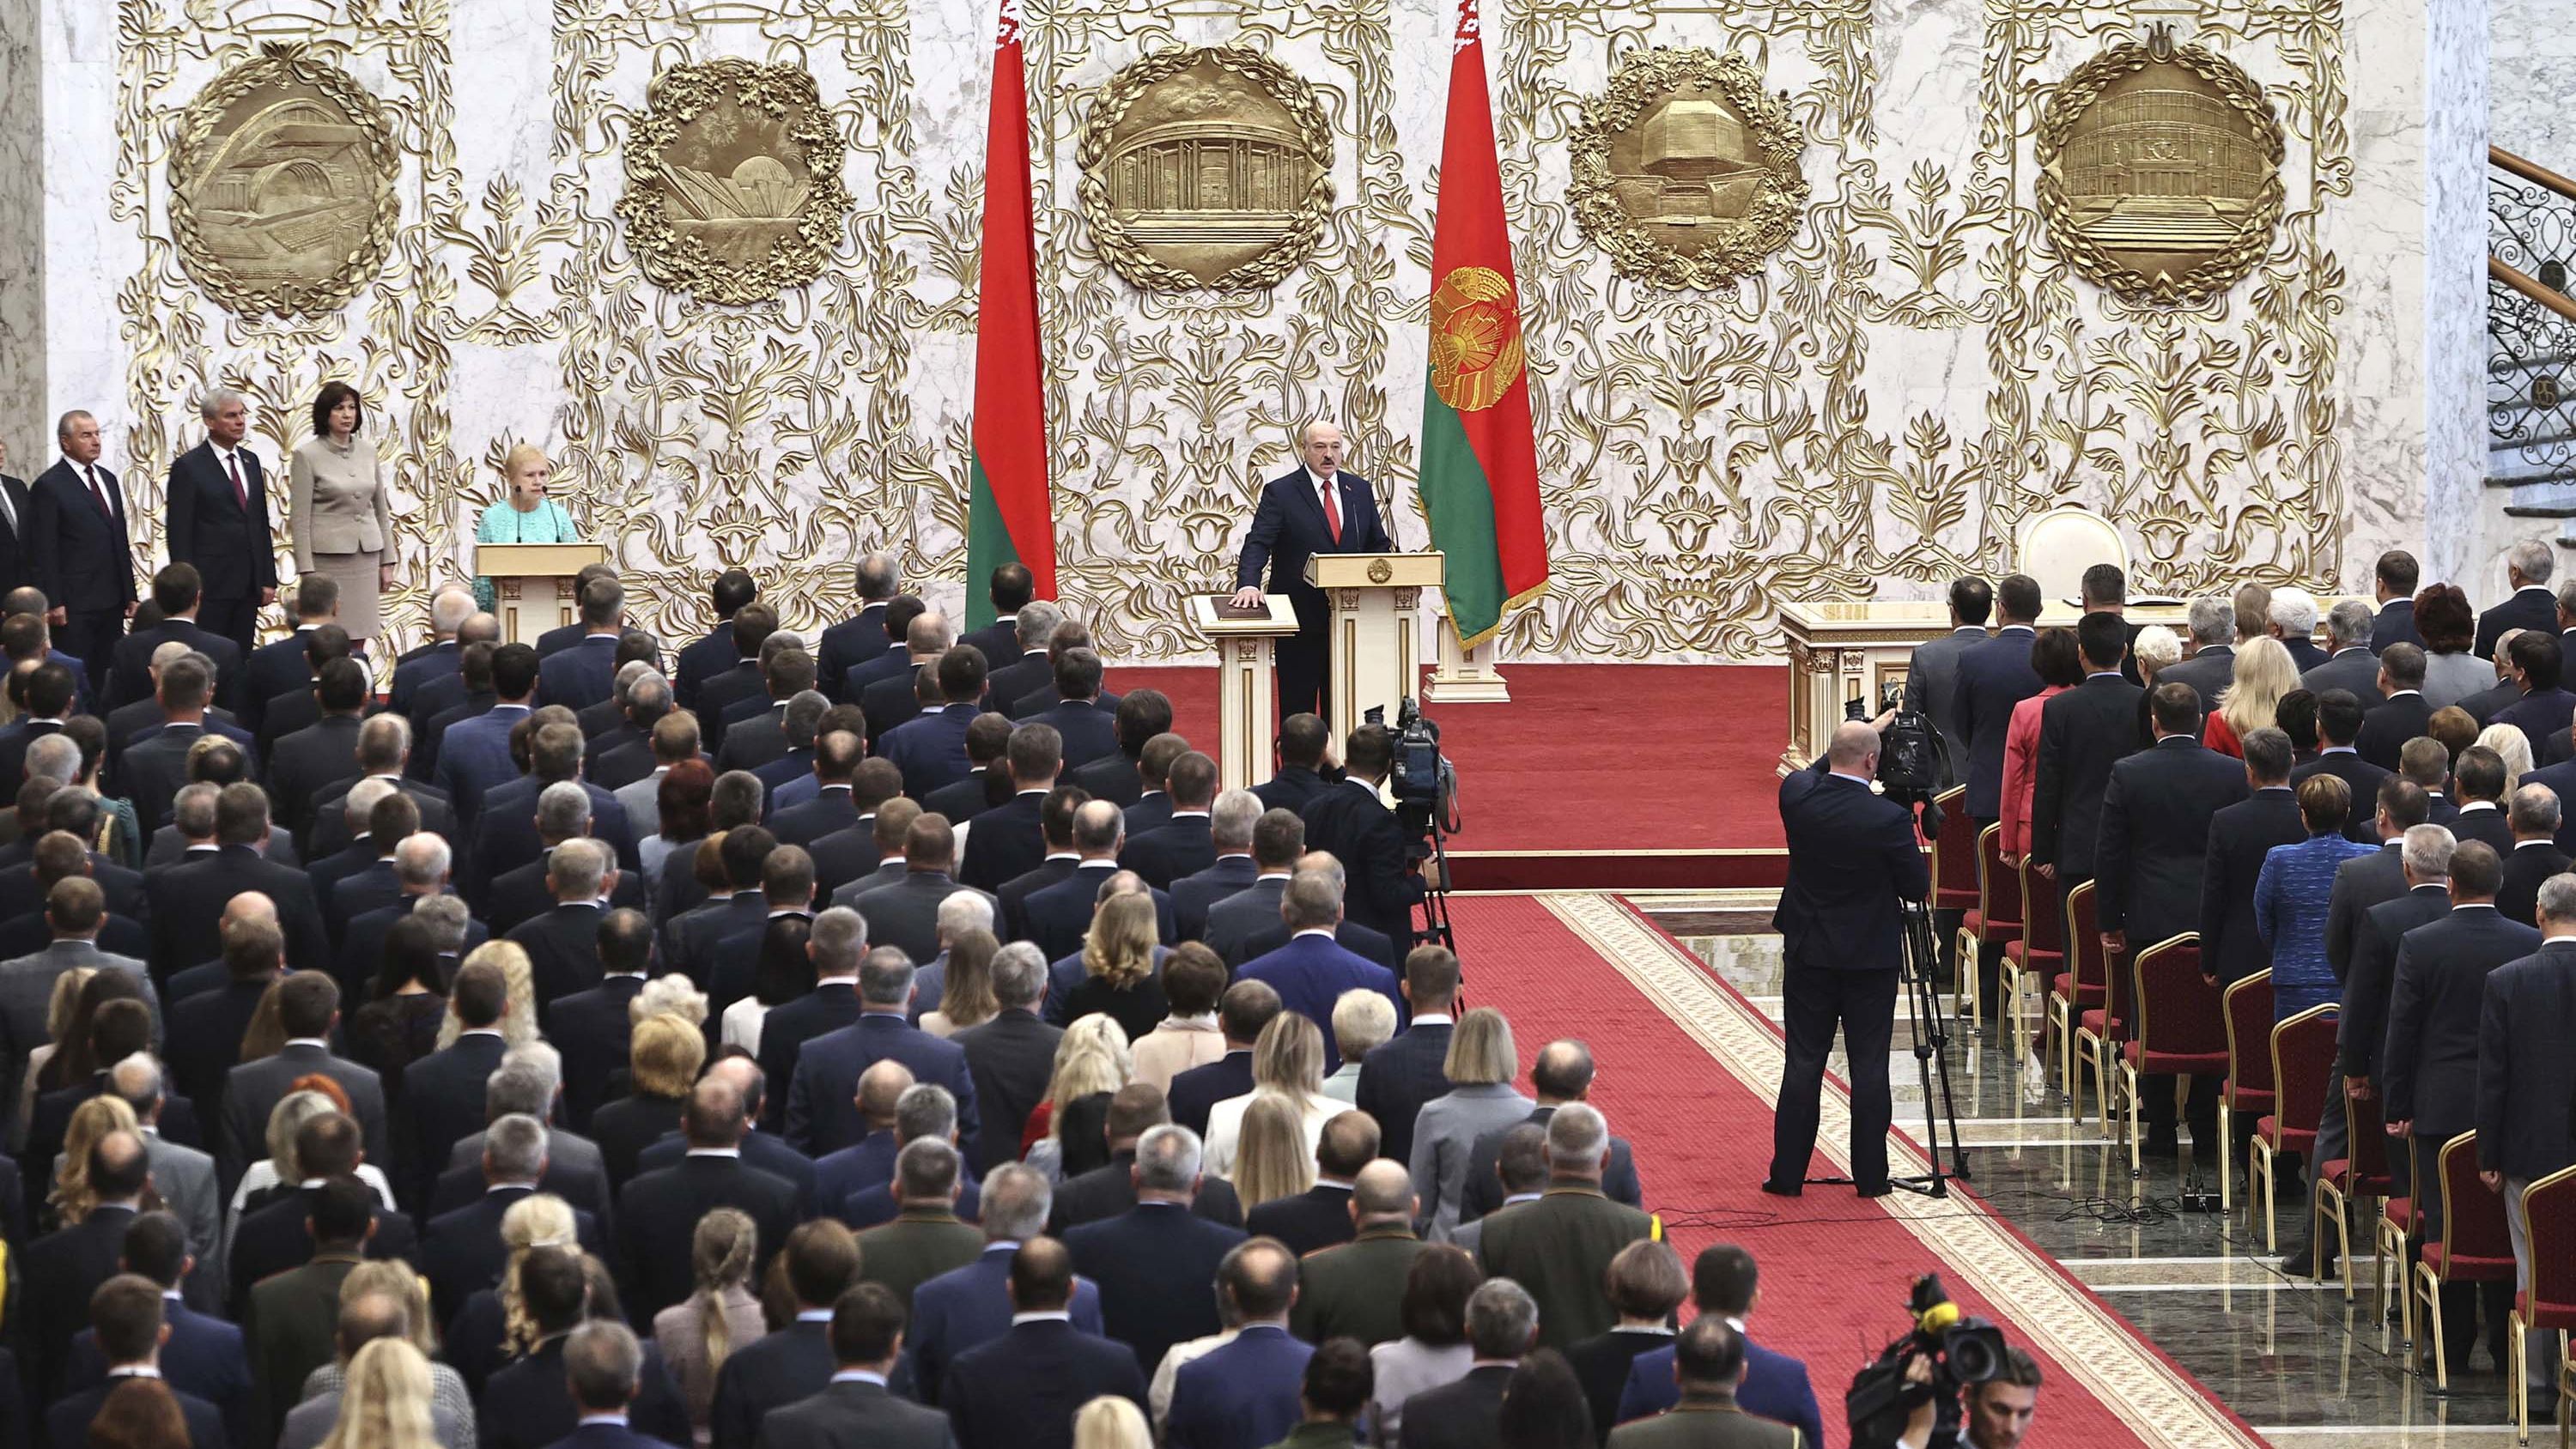 Lukashenko takes his oath of office during his inauguration ceremony in Minsk on Wednesday.